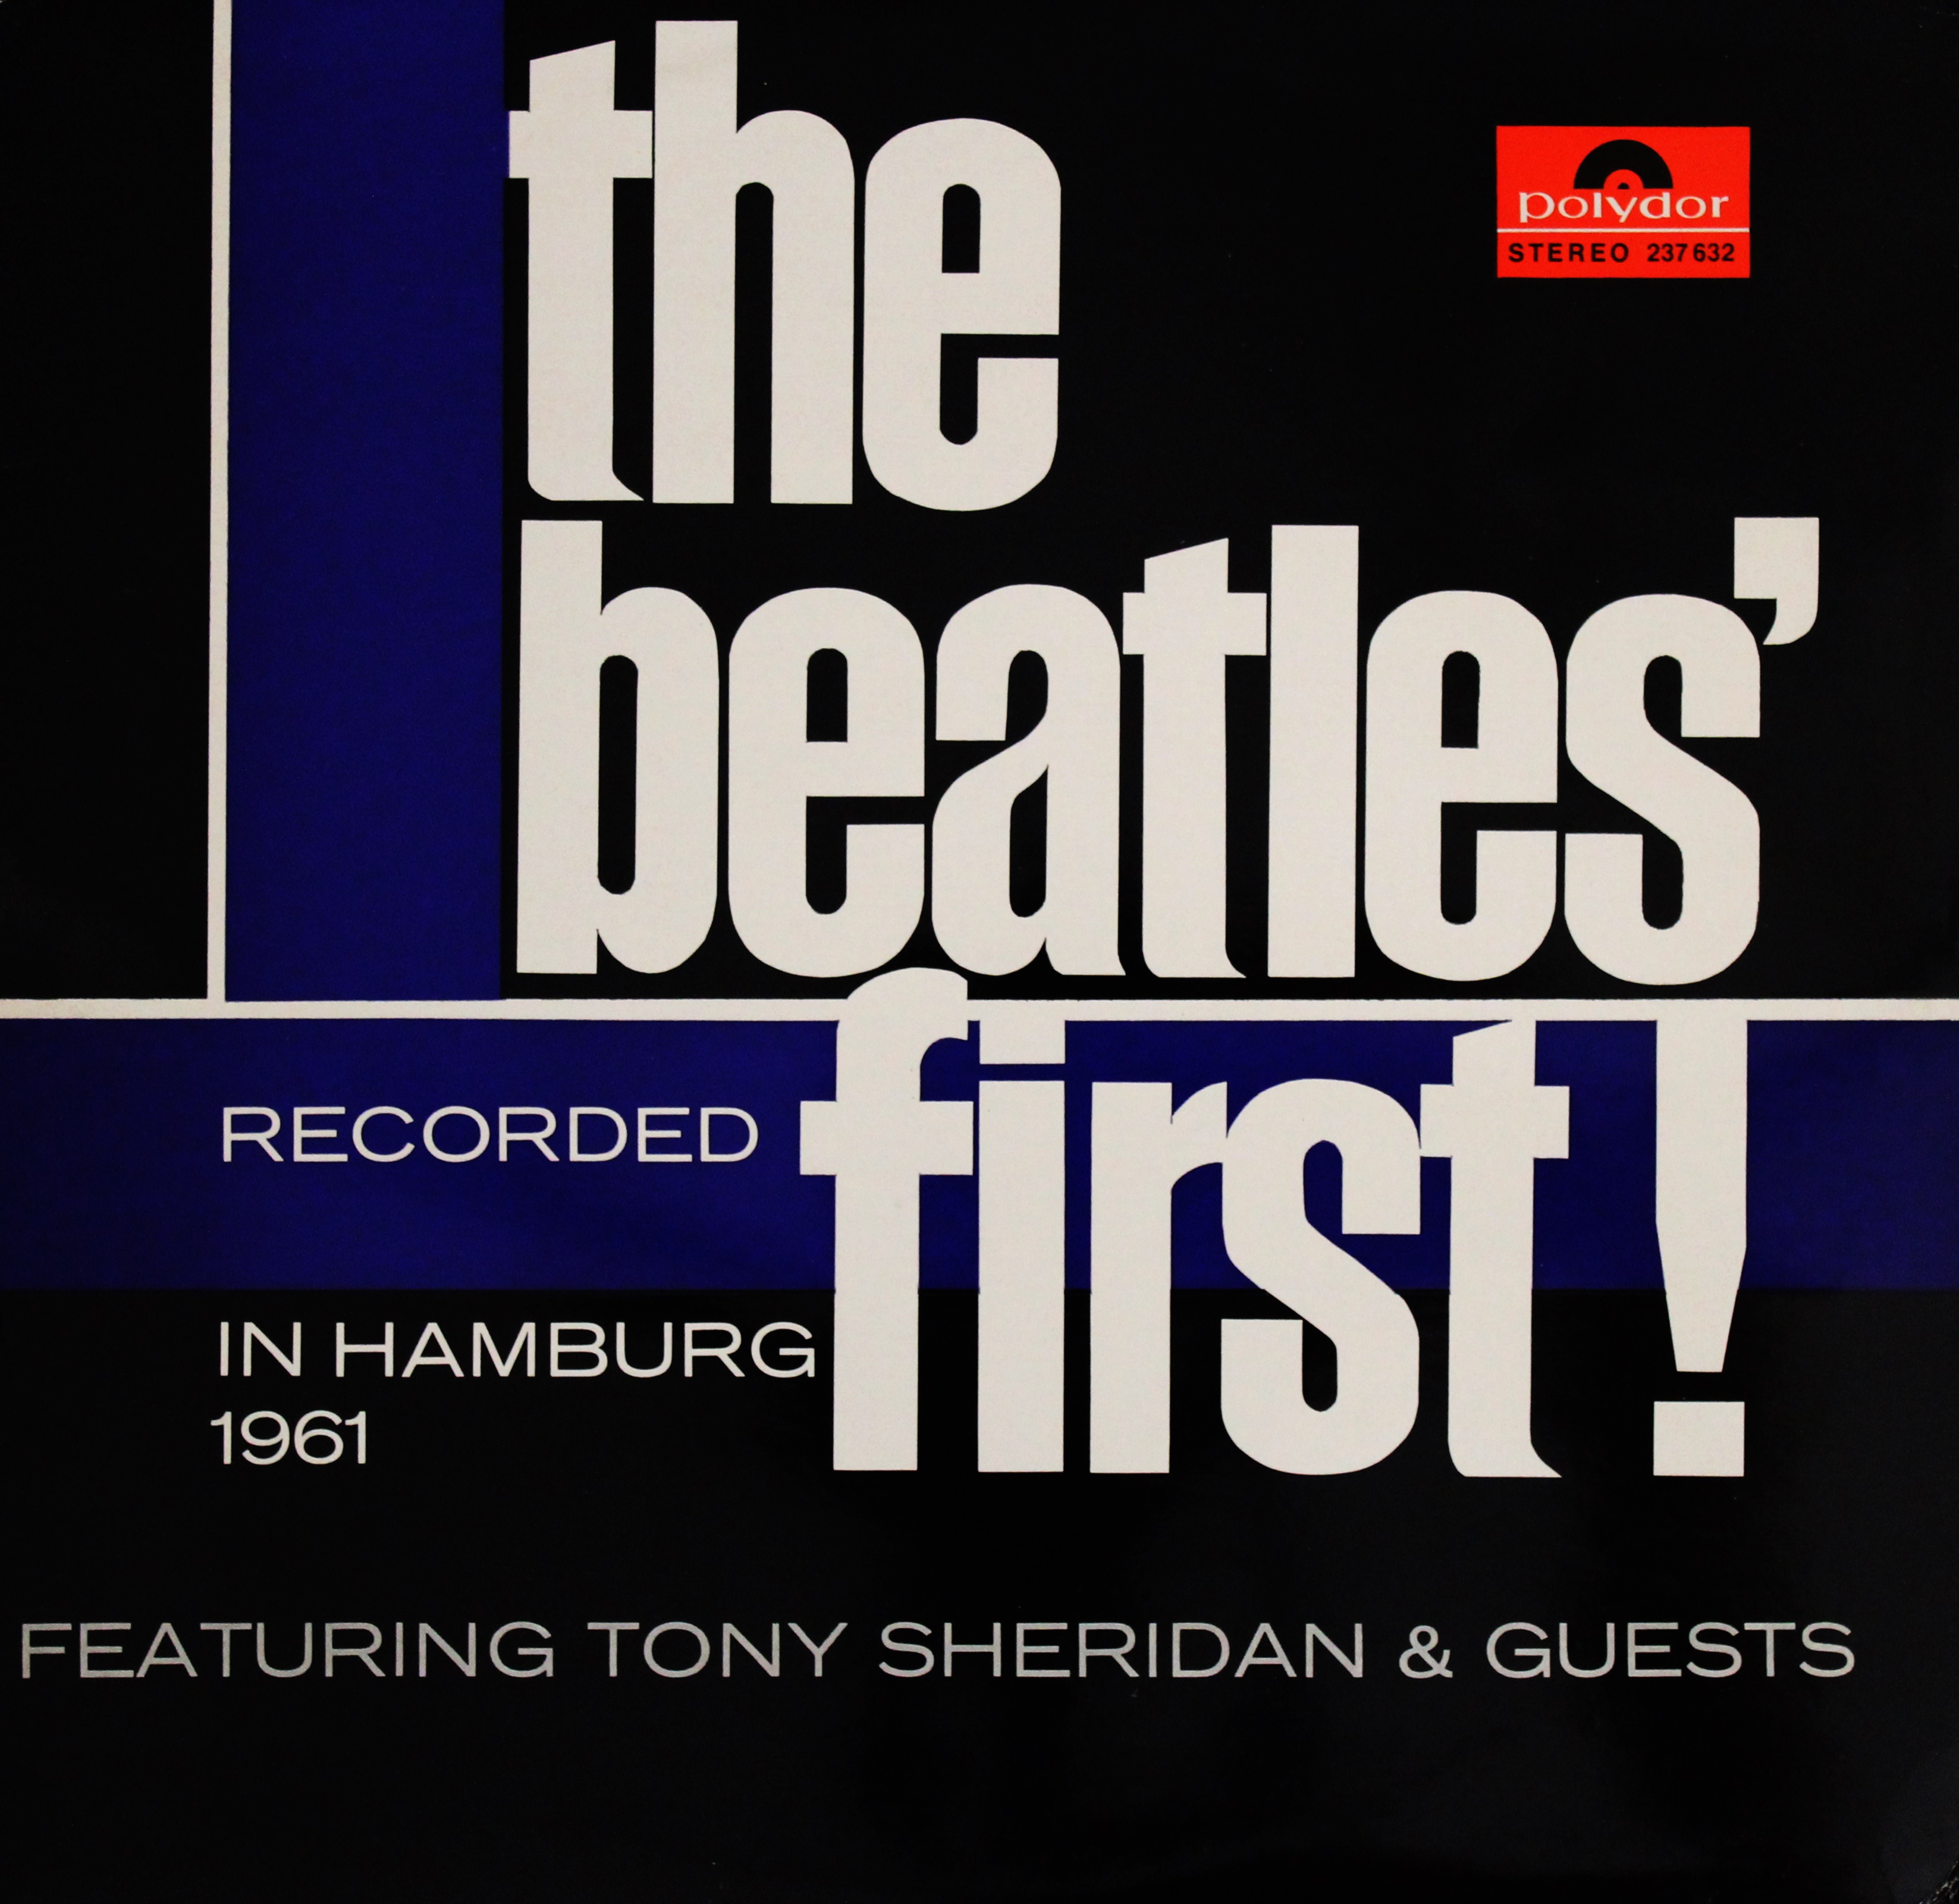 The Beatles Collection » The Beatles First, Polydor Special MCPS